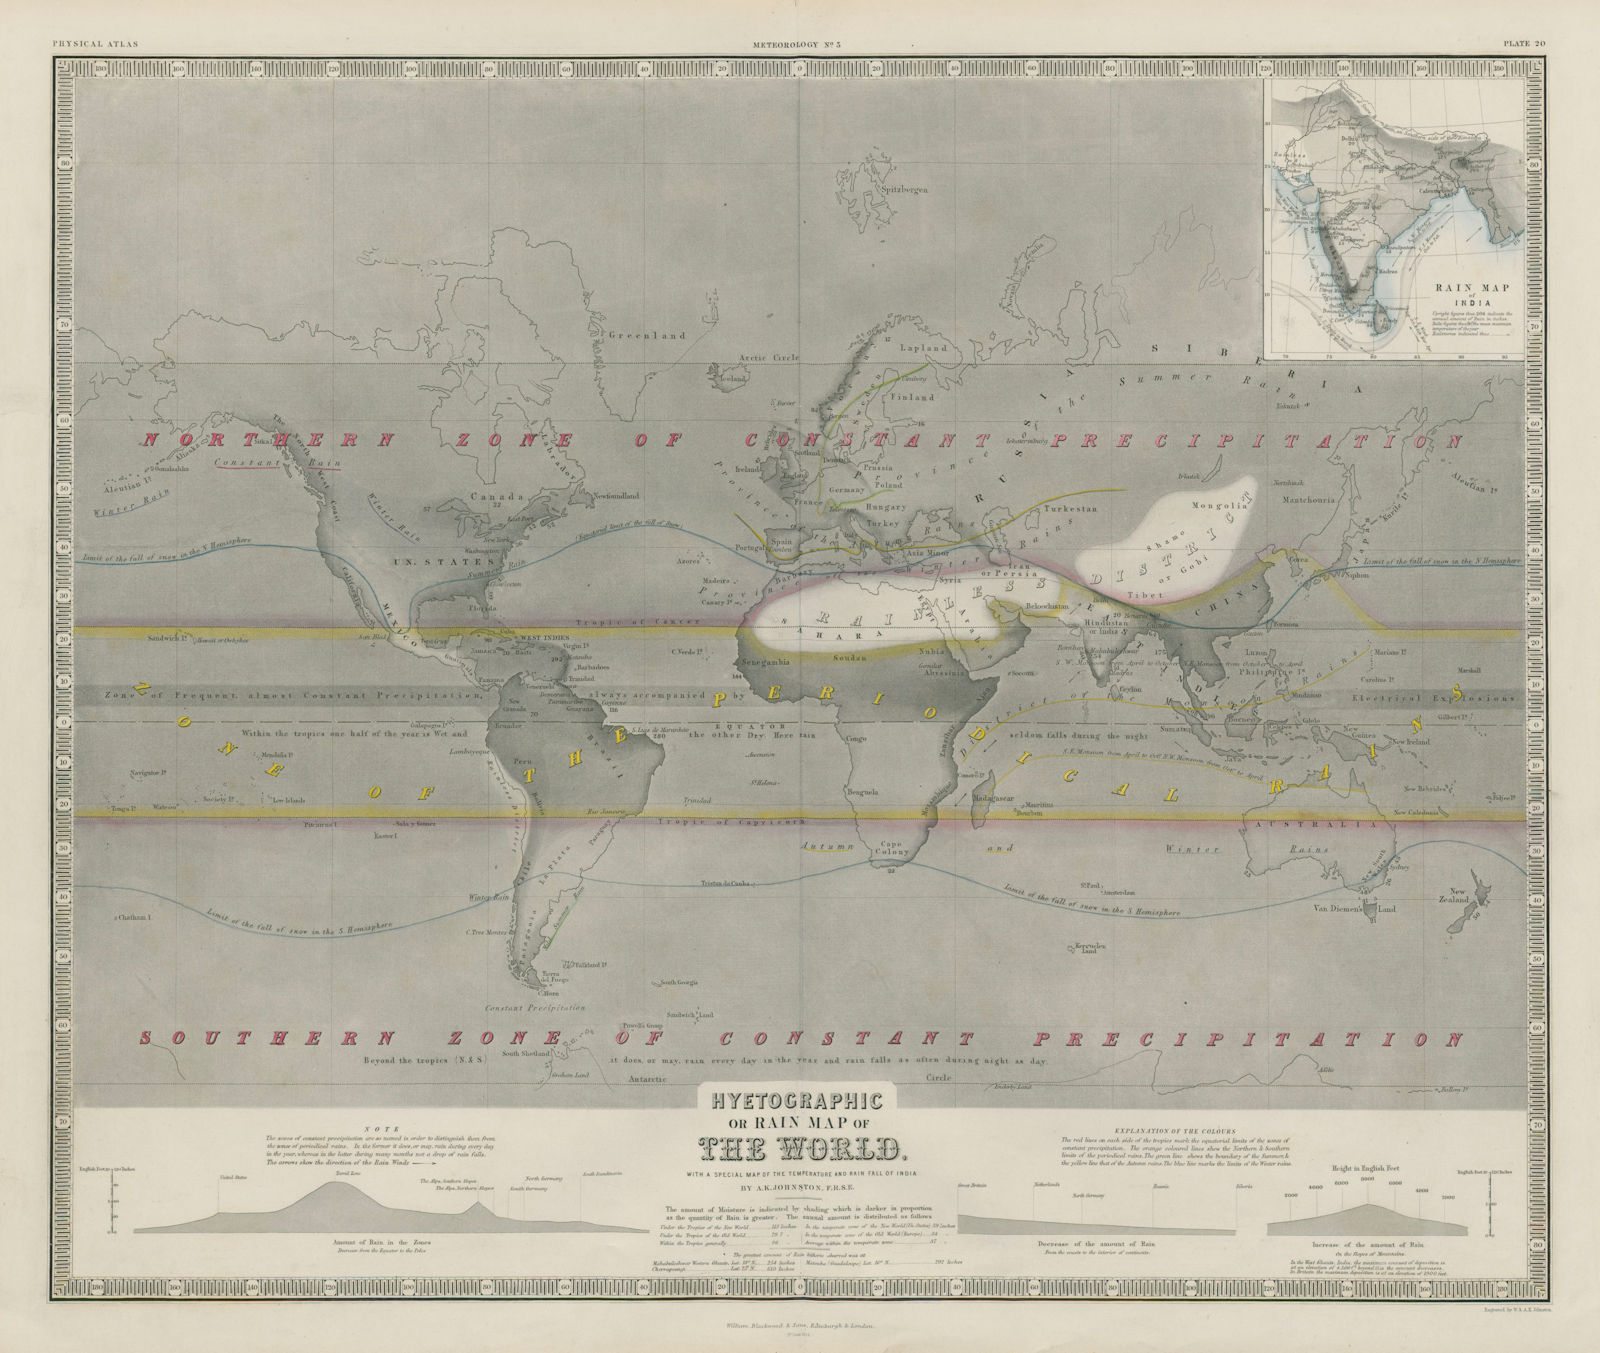 Associate Product Hyetographic or rain map of the world. Monsoon zones. JOHNSTON 1856 old